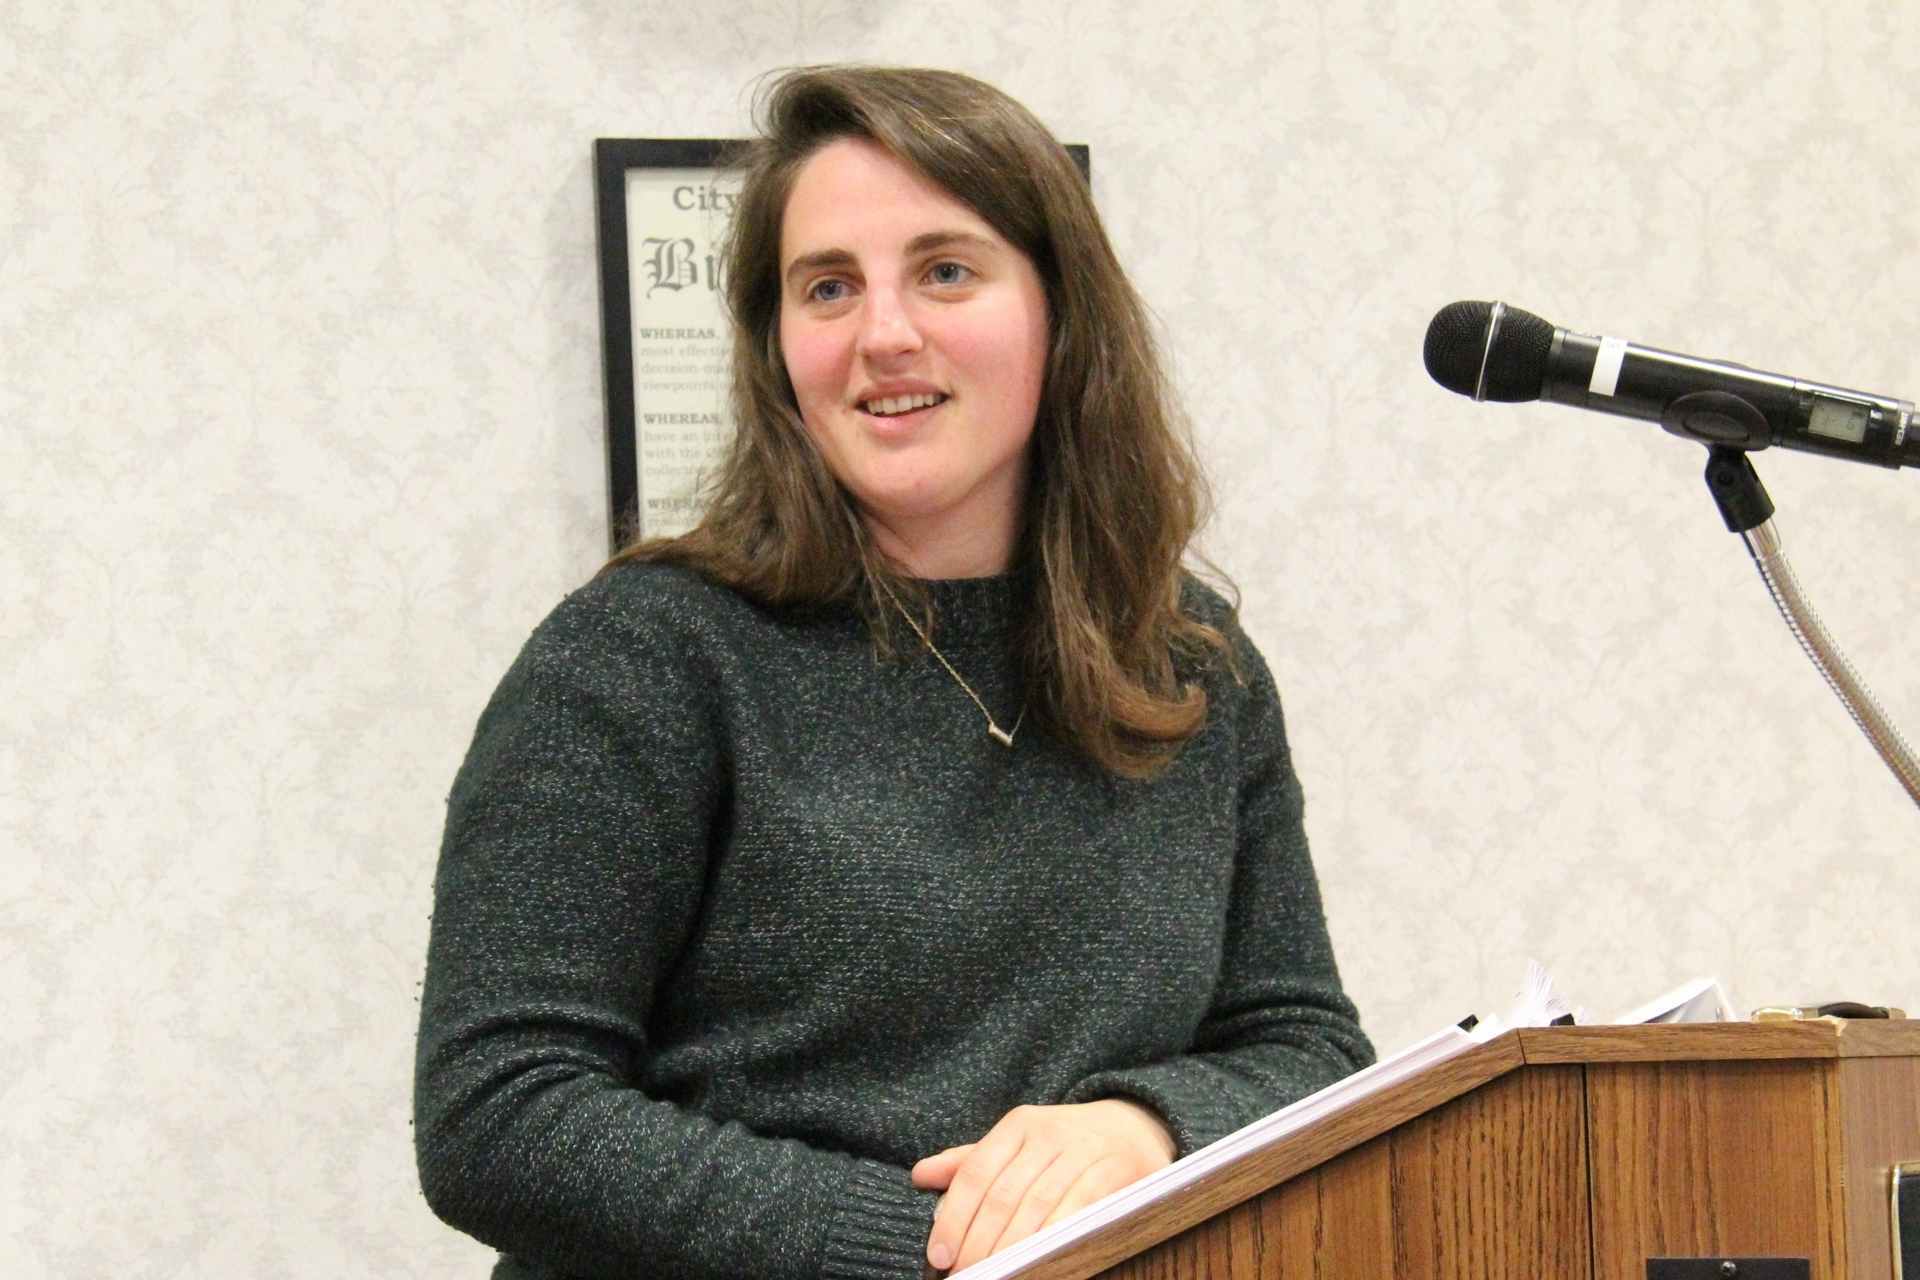 Meredith Dreistadt, from the West Virginia State Historic Preservation Office attended the April 5, Buckhannon Historic Landmarks Commission meeting to discuss ways people can receive assistance for the upkeep of historical structures. / Photo by Monica Zalaznik